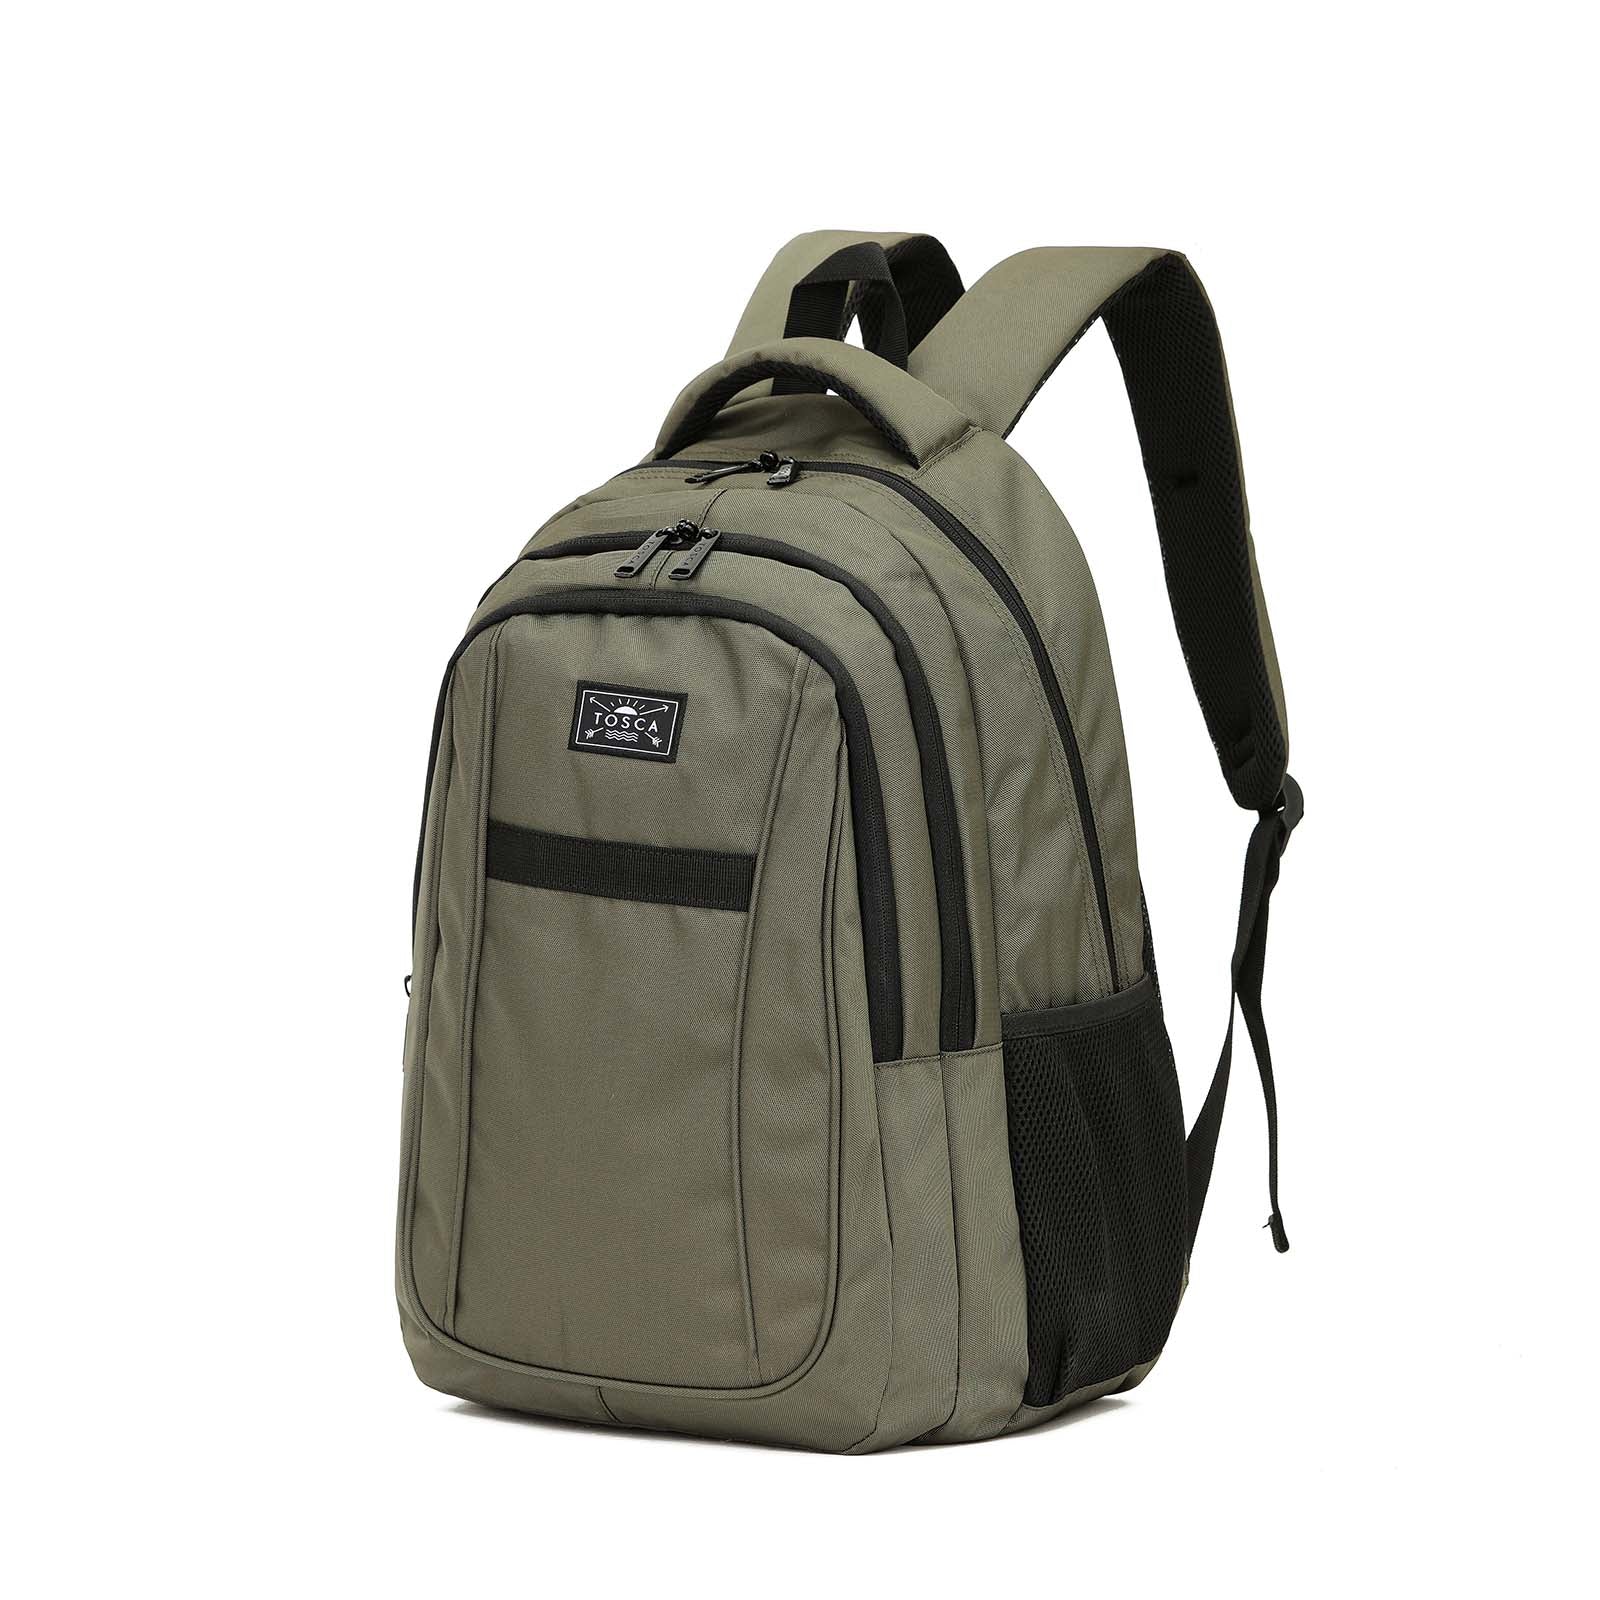 tosca-multi-compartment-laptop-backpack-35l-khaki-front-angle